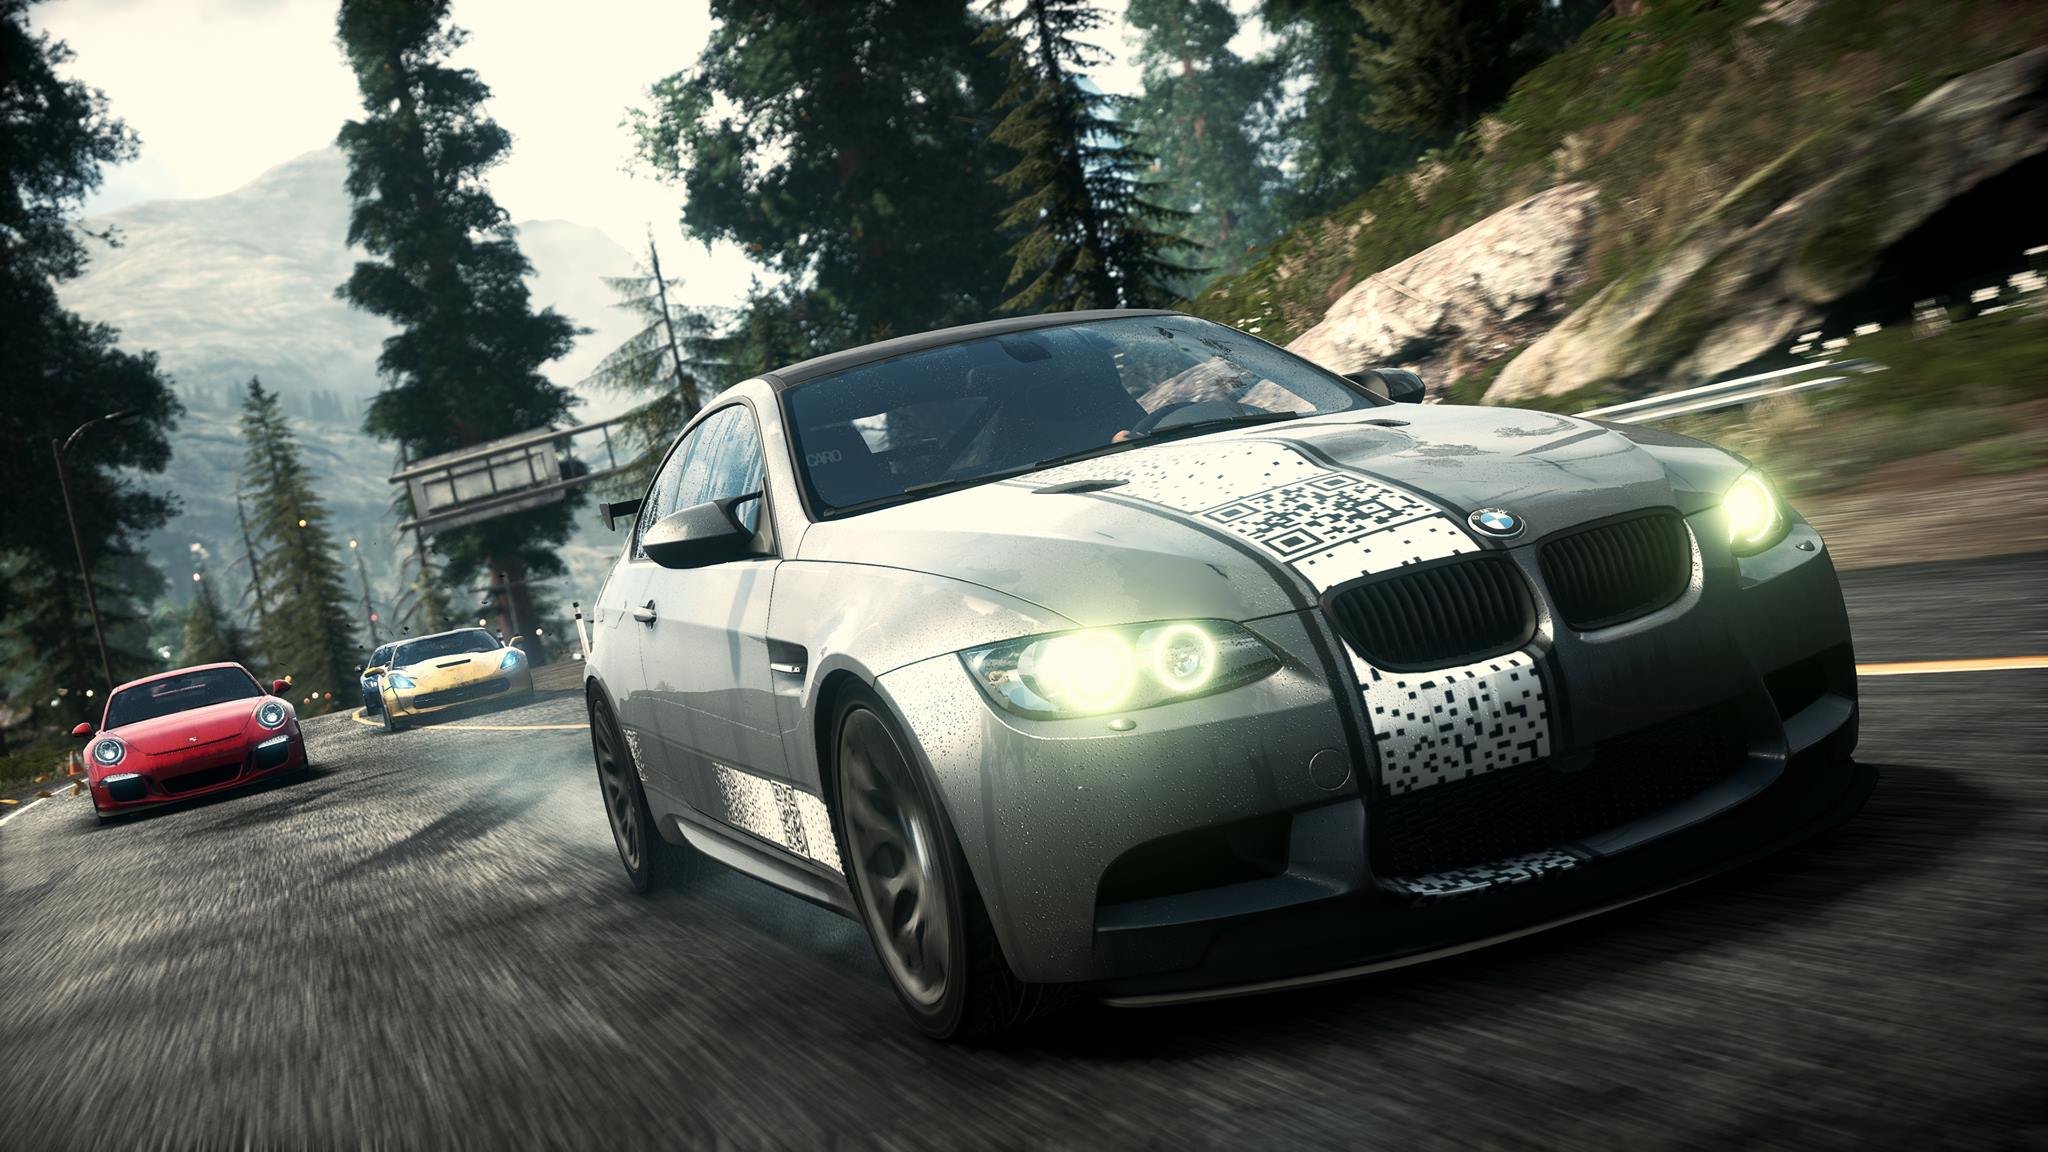 Need for Speed Rivals Xbox 360. Need for Speed Rivals BMW m3 GTR. Игра NFS Rivals. Need for Speed Rivals 2013. Нид фор спид ноутбук